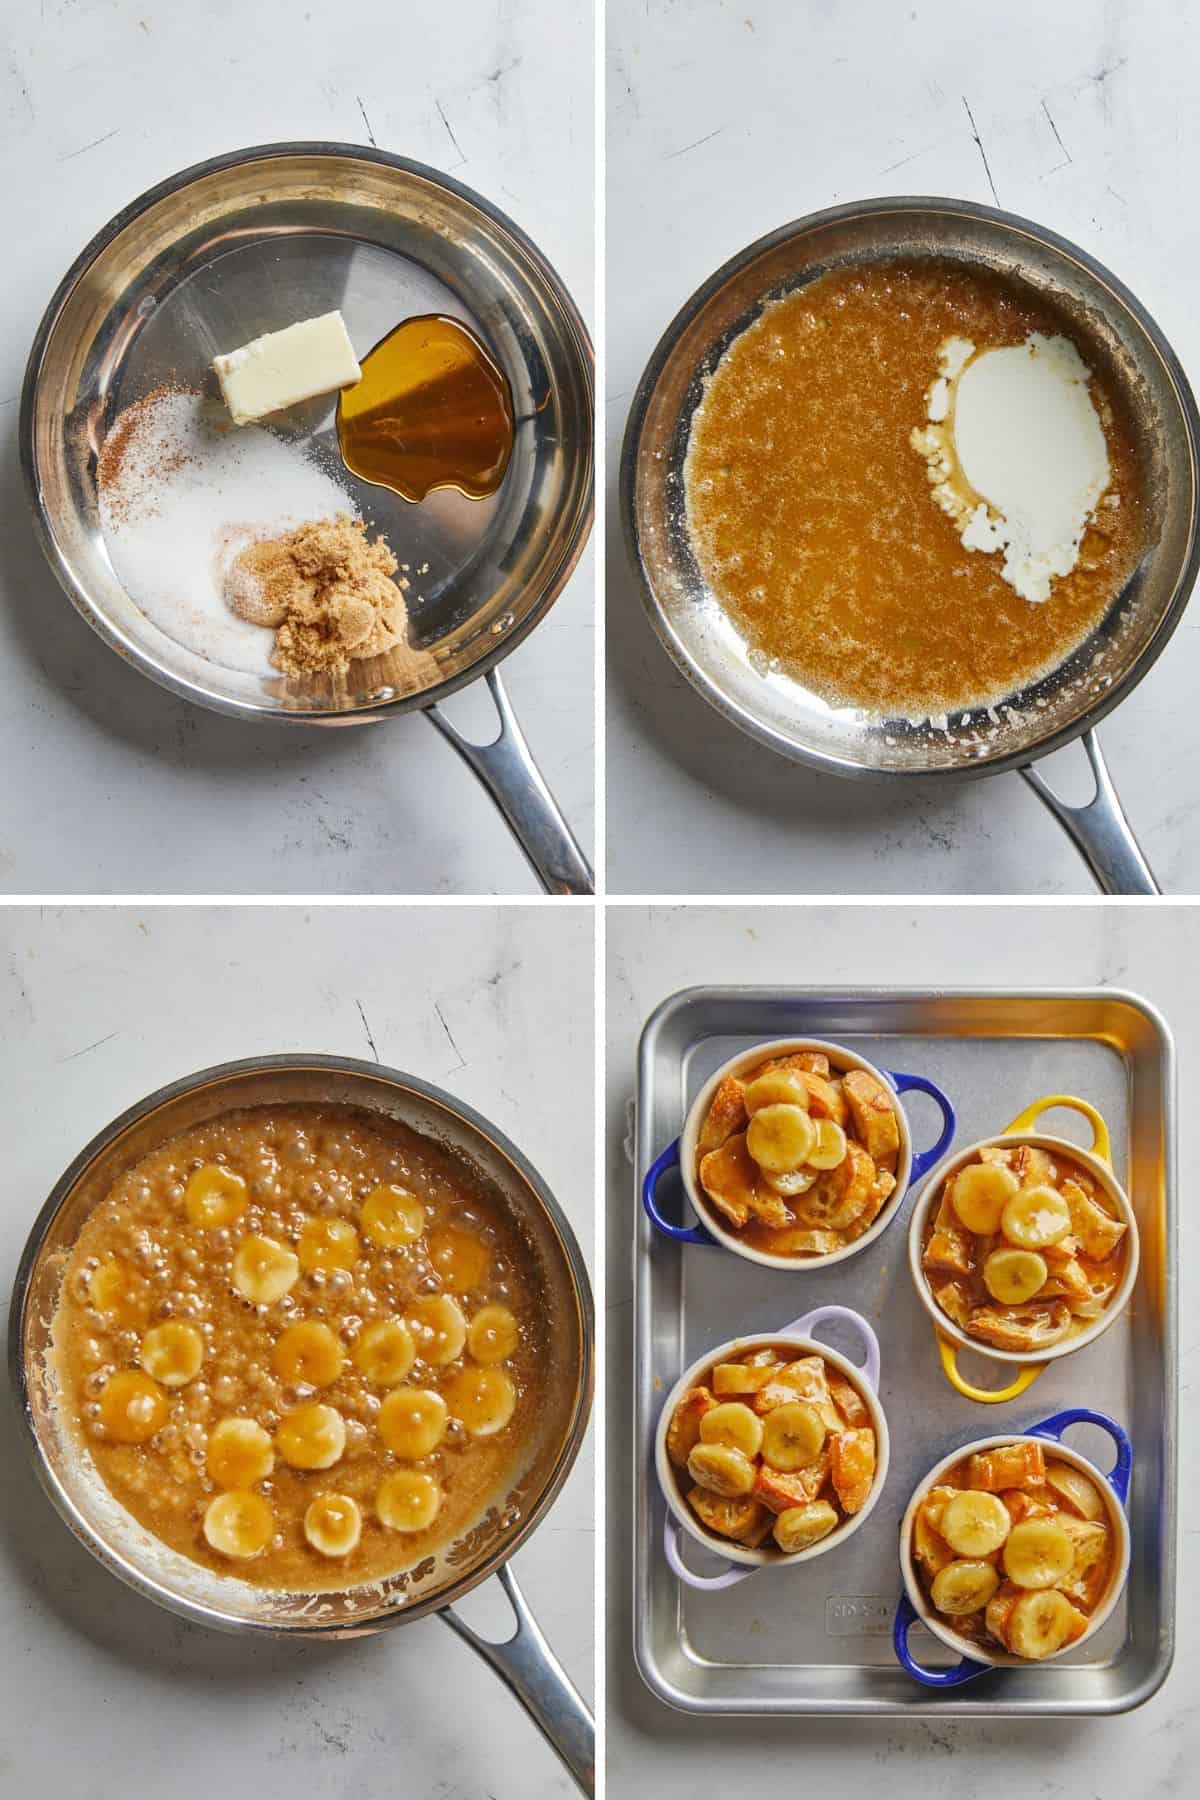 A collage of making the bananas foster with ingredients in a skillet, adding the cream, adding the bananas, and the on top of the bread pudding.